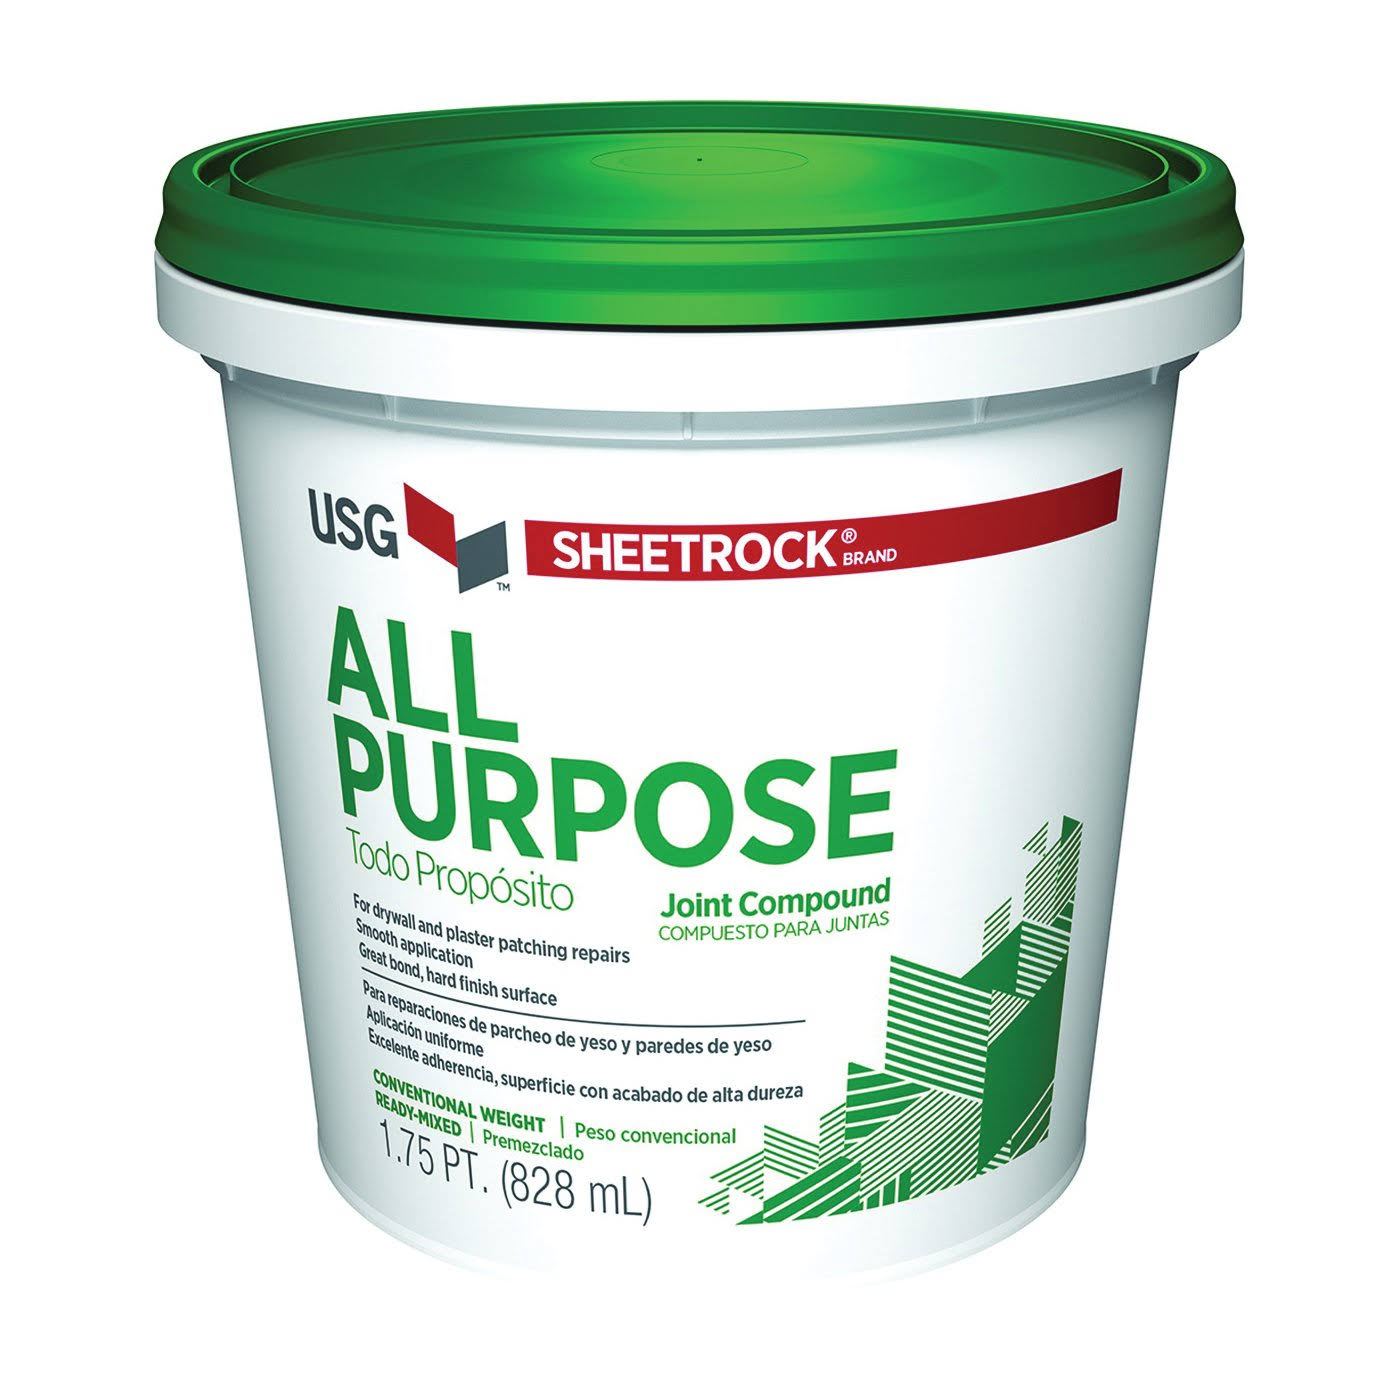 United States Gypsum Sheetrock All Purpose Pre-Mixed Joint Compound - 946ml